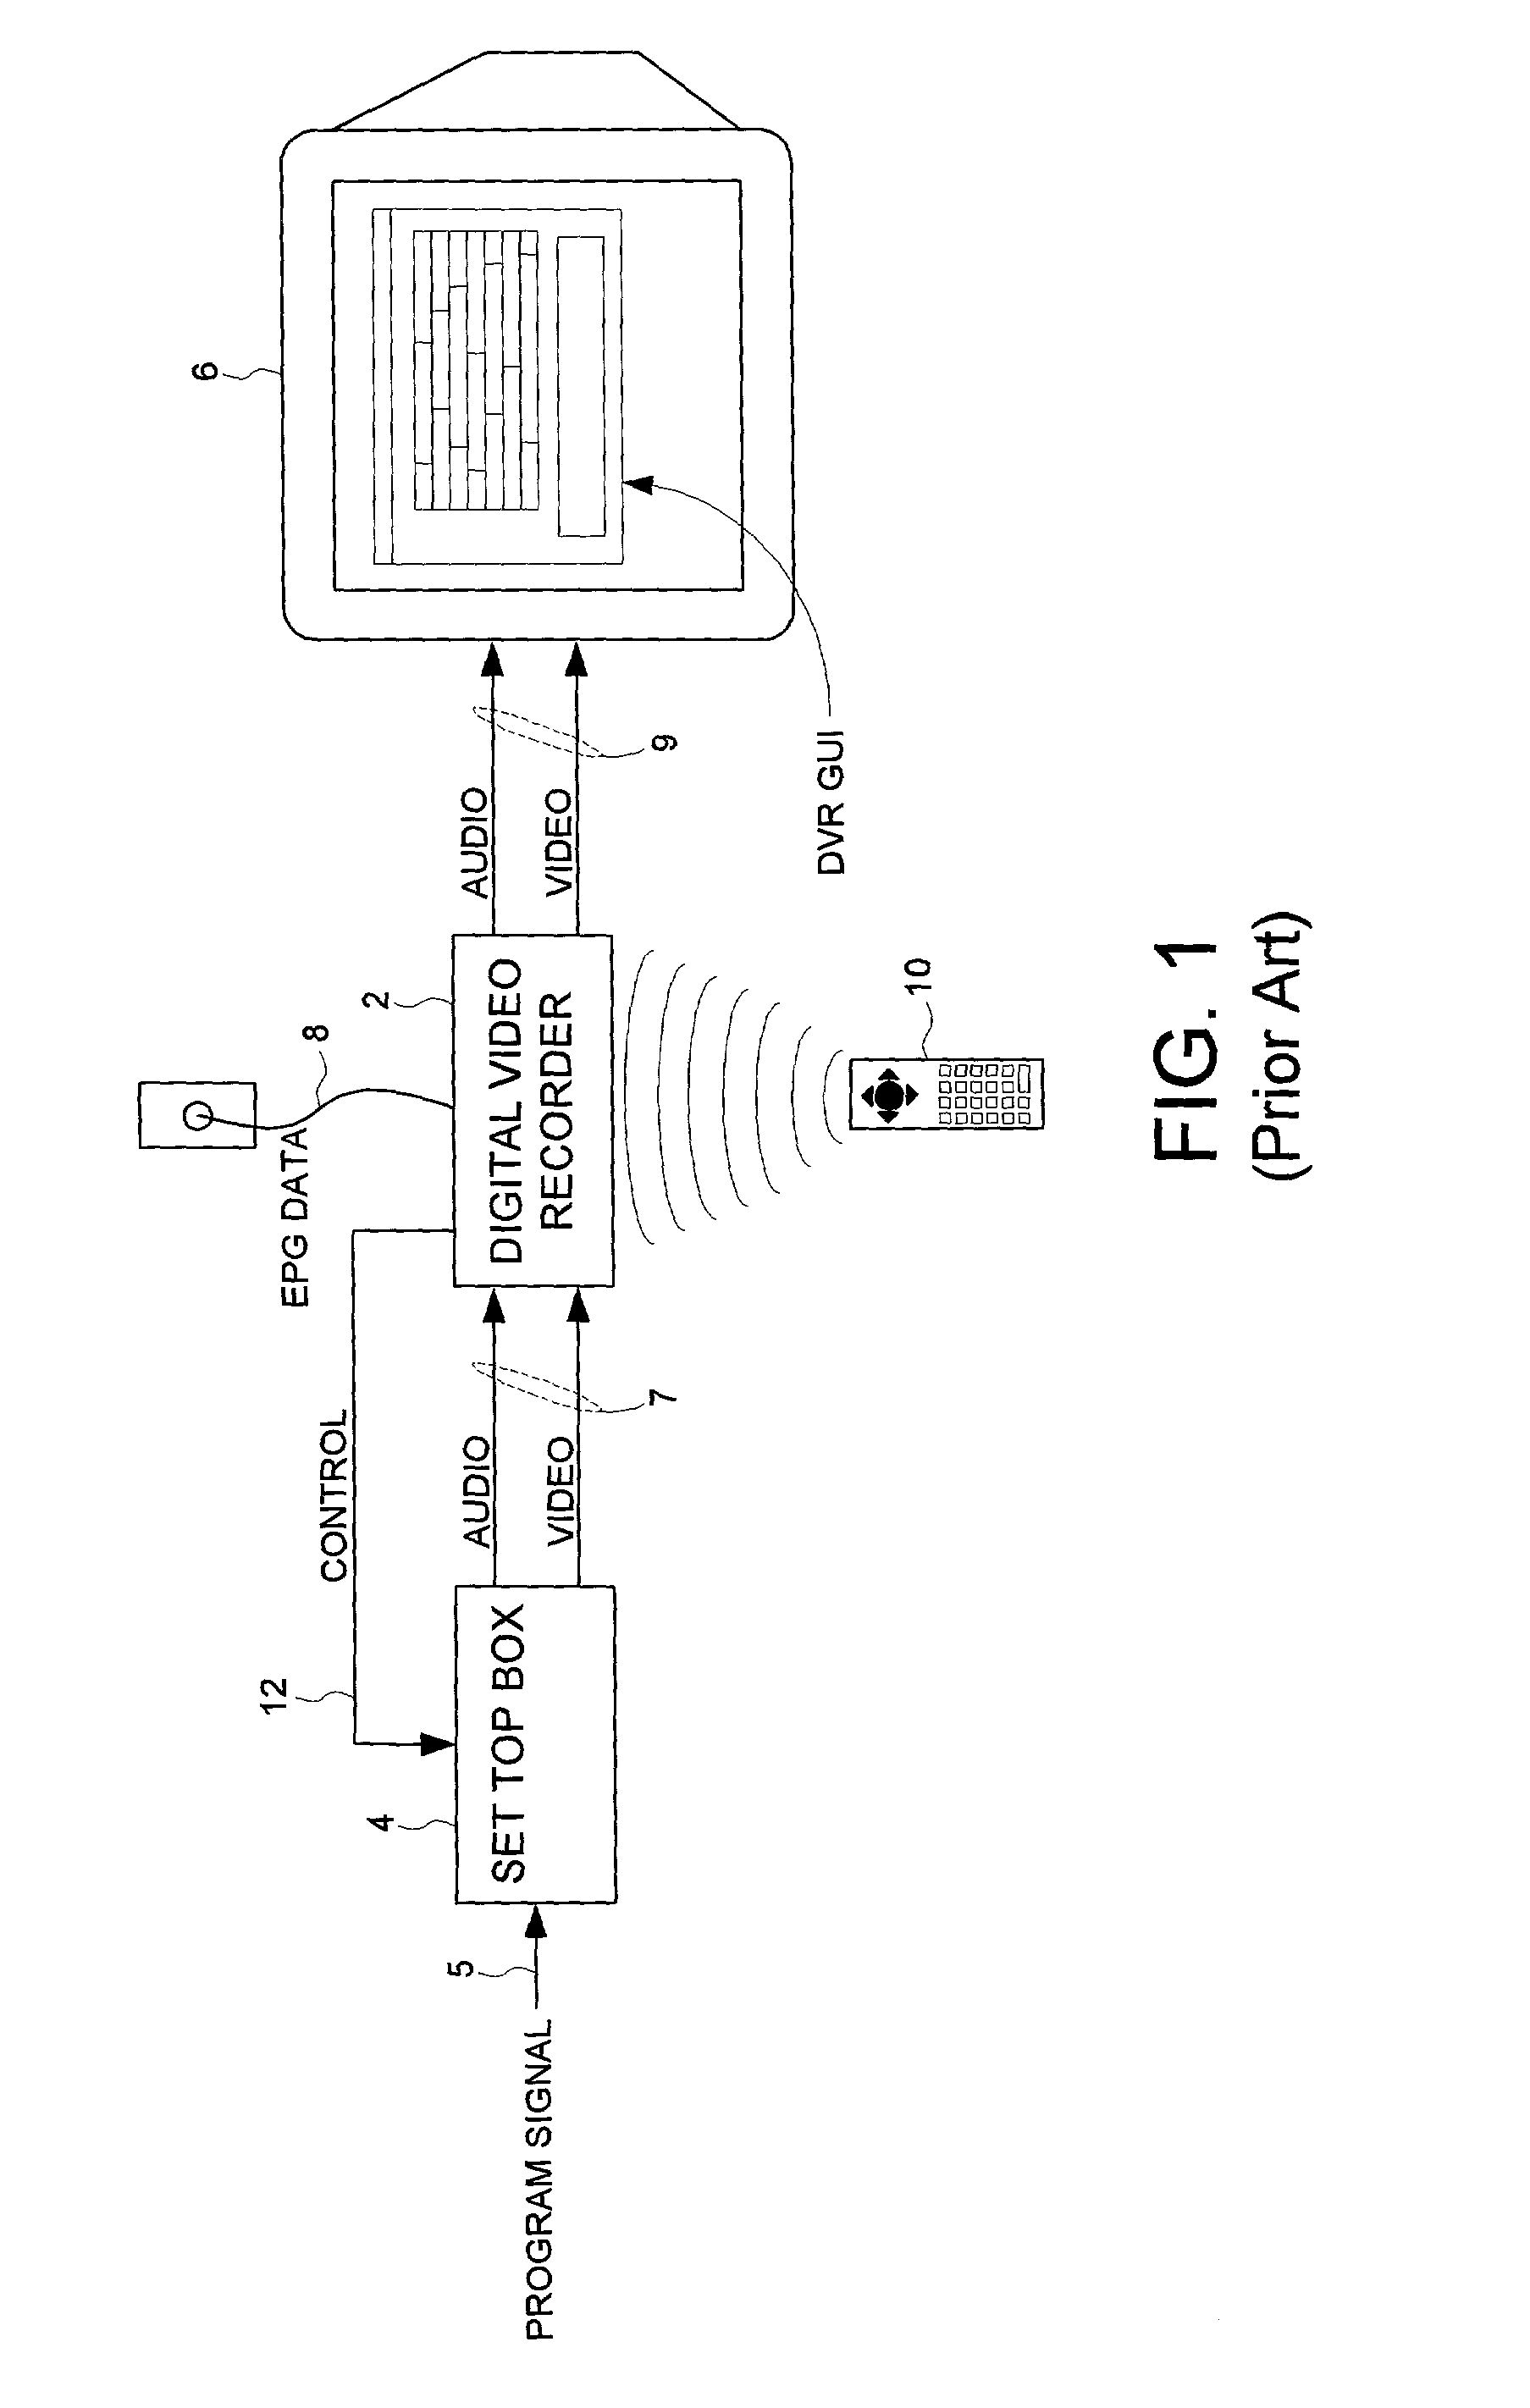 Communicating between a digital video recorder (DVR) and a set top box (STB) to coordinate the display of a graphical user interface